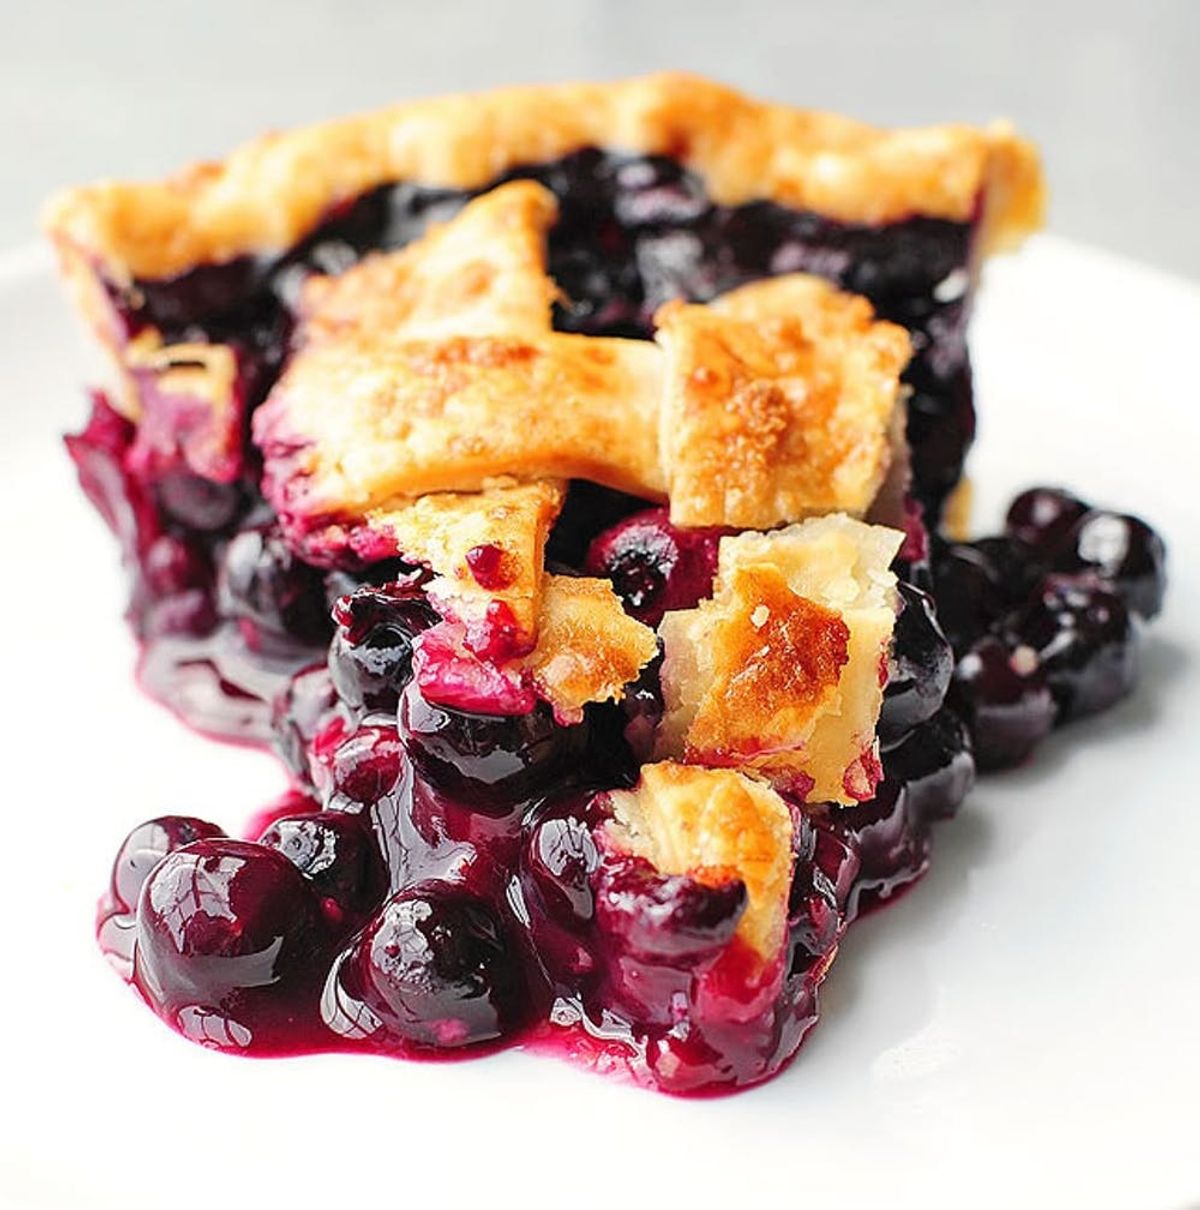 20 Blueberry Recipes That’ll Make You Feel Anything But Blue